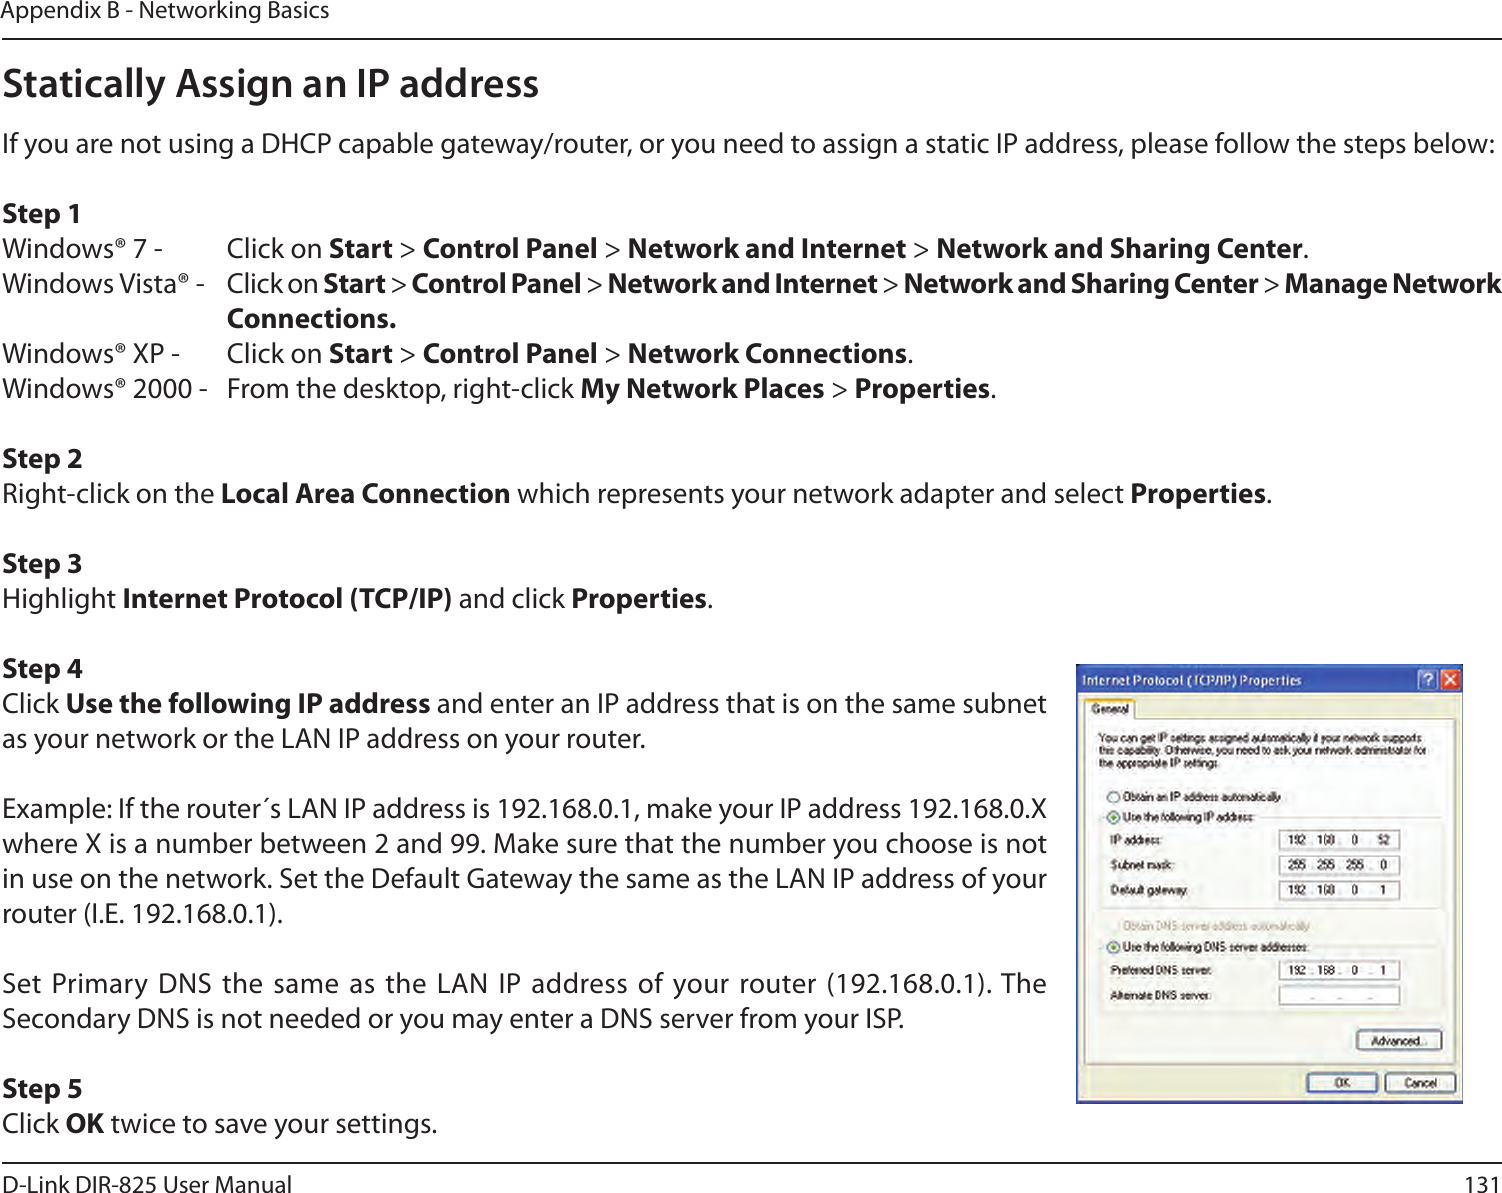 131D-Link DIR-825 User ManualAppendix B - Networking BasicsStatically Assign an IP addressIf you are not using a DHCP capable gateway/router, or you need to assign a static IP address, please follow the steps below:Step 1Windows® 7 -  Click on Start &gt; Control Panel &gt; Network and Internet &gt; Network and Sharing Center.Windows Vista® -  Click on Start &gt; Control Panel &gt; Network and Internet &gt; Network and Sharing Center &gt; Manage Network      Connections.Windows® XP -  Click on Start &gt; Control Panel &gt; Network Connections.Windows® 2000 -  From the desktop, right-click My Network Places &gt; Properties.Step 2Right-click on the Local Area Connection which represents your network adapter and select Properties.Step 3Highlight Internet Protocol (TCP/IP) and click Properties.Step 4Click Use the following IP address and enter an IP address that is on the same subnet as your network or the LAN IP address on your router. Example: If the router´s LAN IP address is 192.168.0.1, make your IP address 192.168.0.X where X is a number between 2 and 99. Make sure that the number you choose is not in use on the network. Set the Default Gateway the same as the LAN IP address of your router (I.E. 192.168.0.1). Set Primary DNS the  same as the LAN  IP address of your router (192.168.0.1). The Secondary DNS is not needed or you may enter a DNS server from your ISP.Step 5Click OK twice to save your settings.